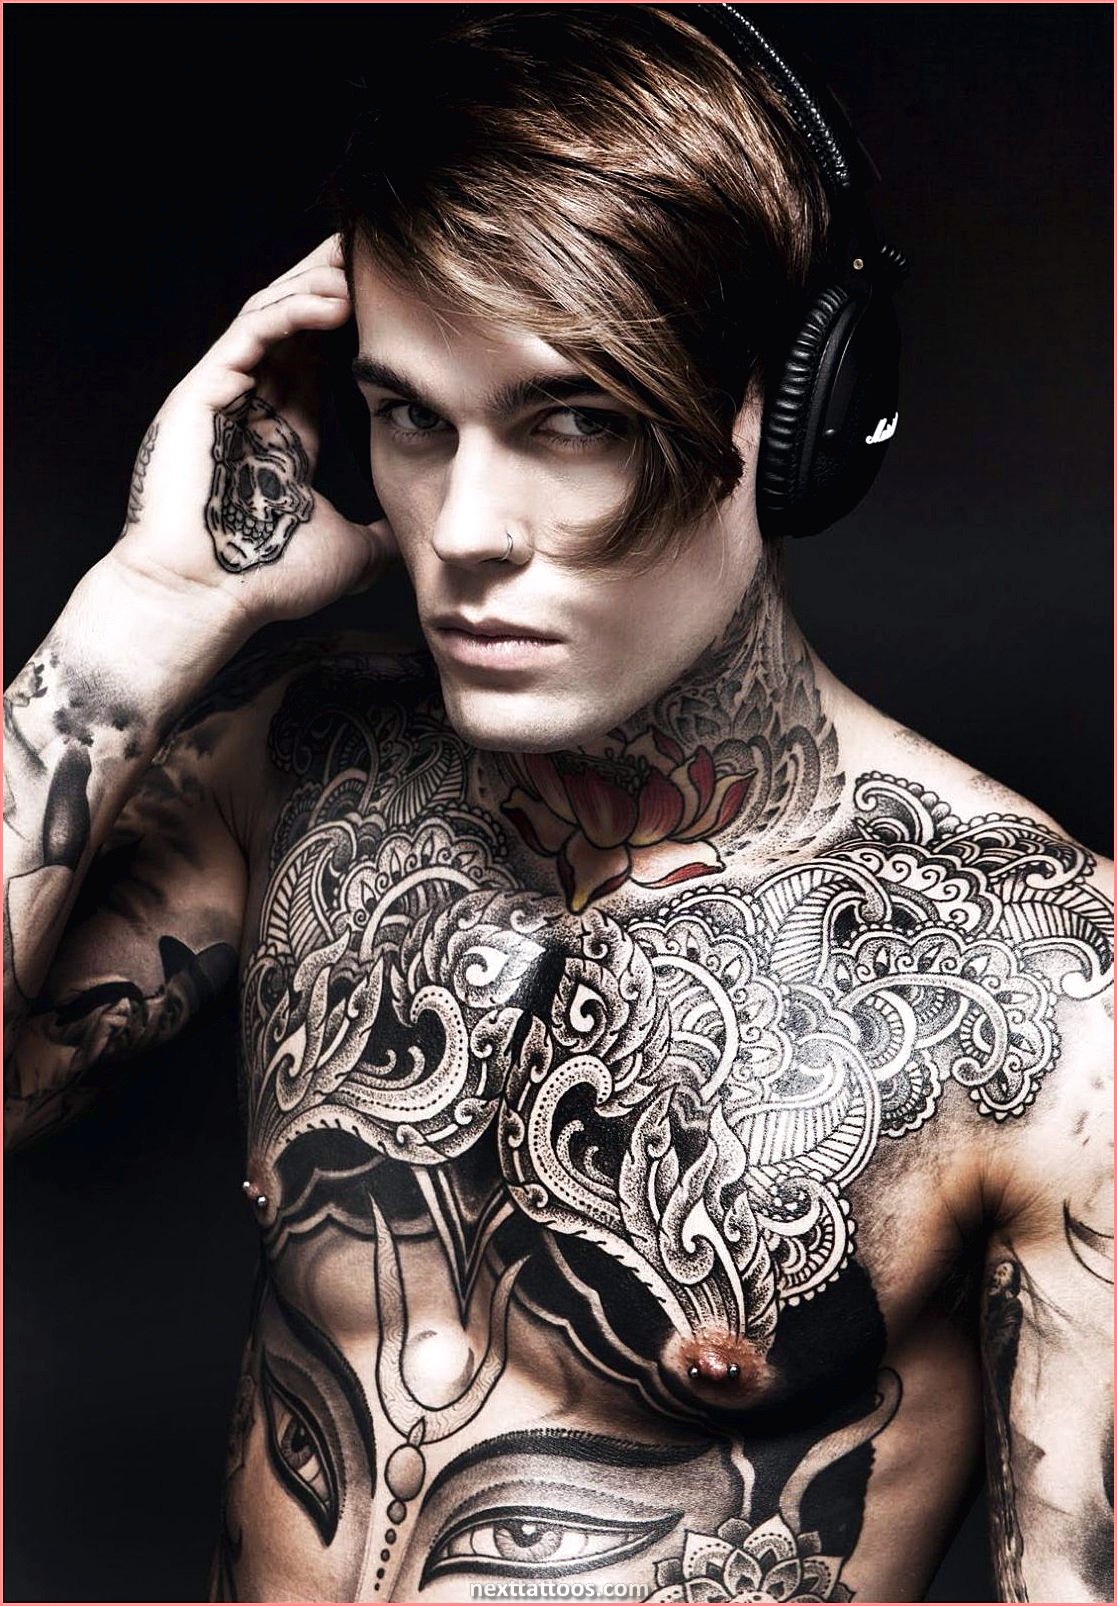 Meanings and Styles of Body Tattoos for Men - Nexttattoos